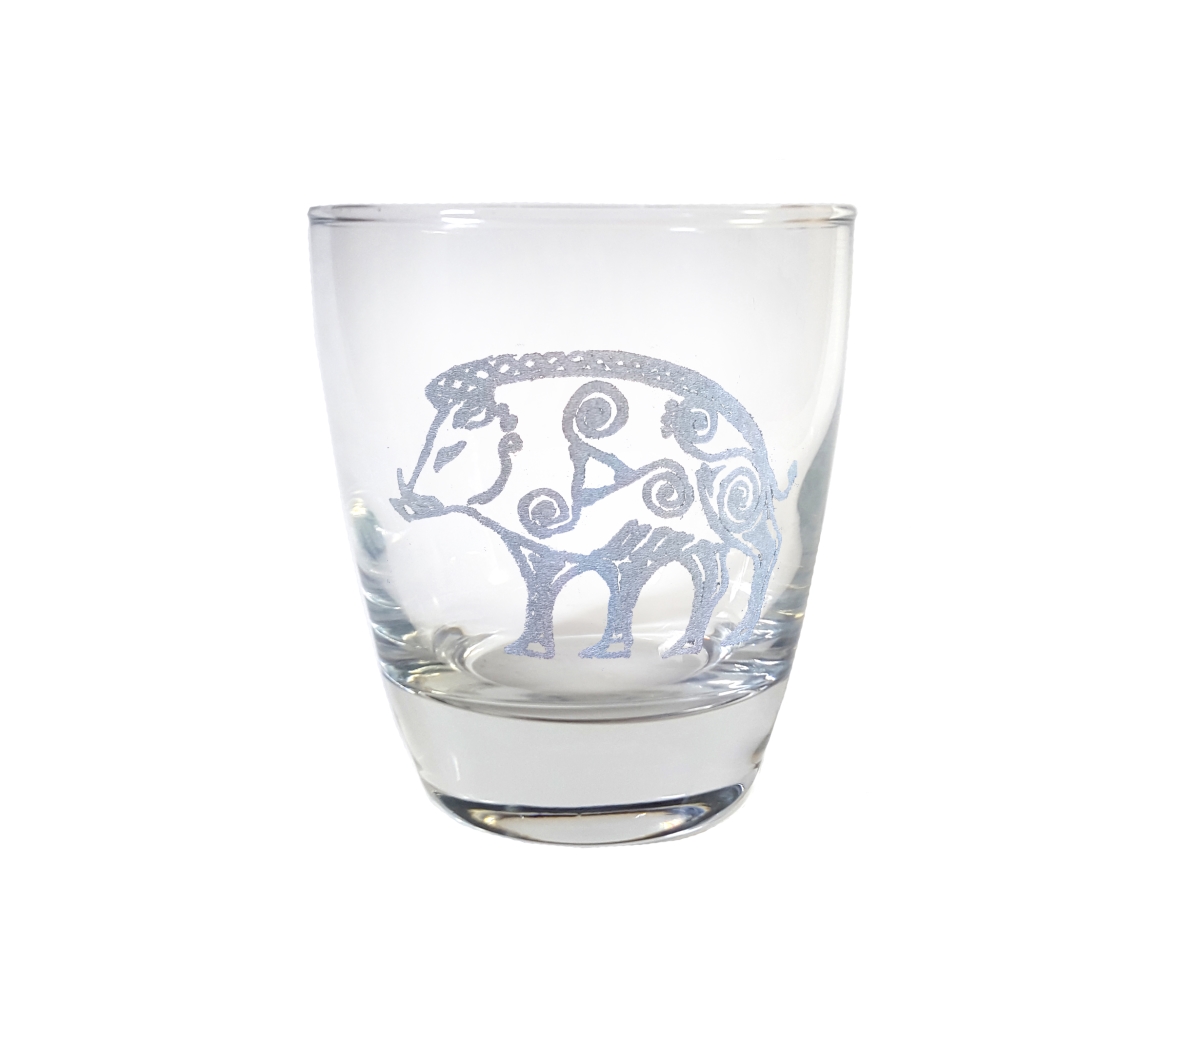 Picture of Lyoncraft LBBO01 10 oz Celtic Boar Engraved Lowball Glass